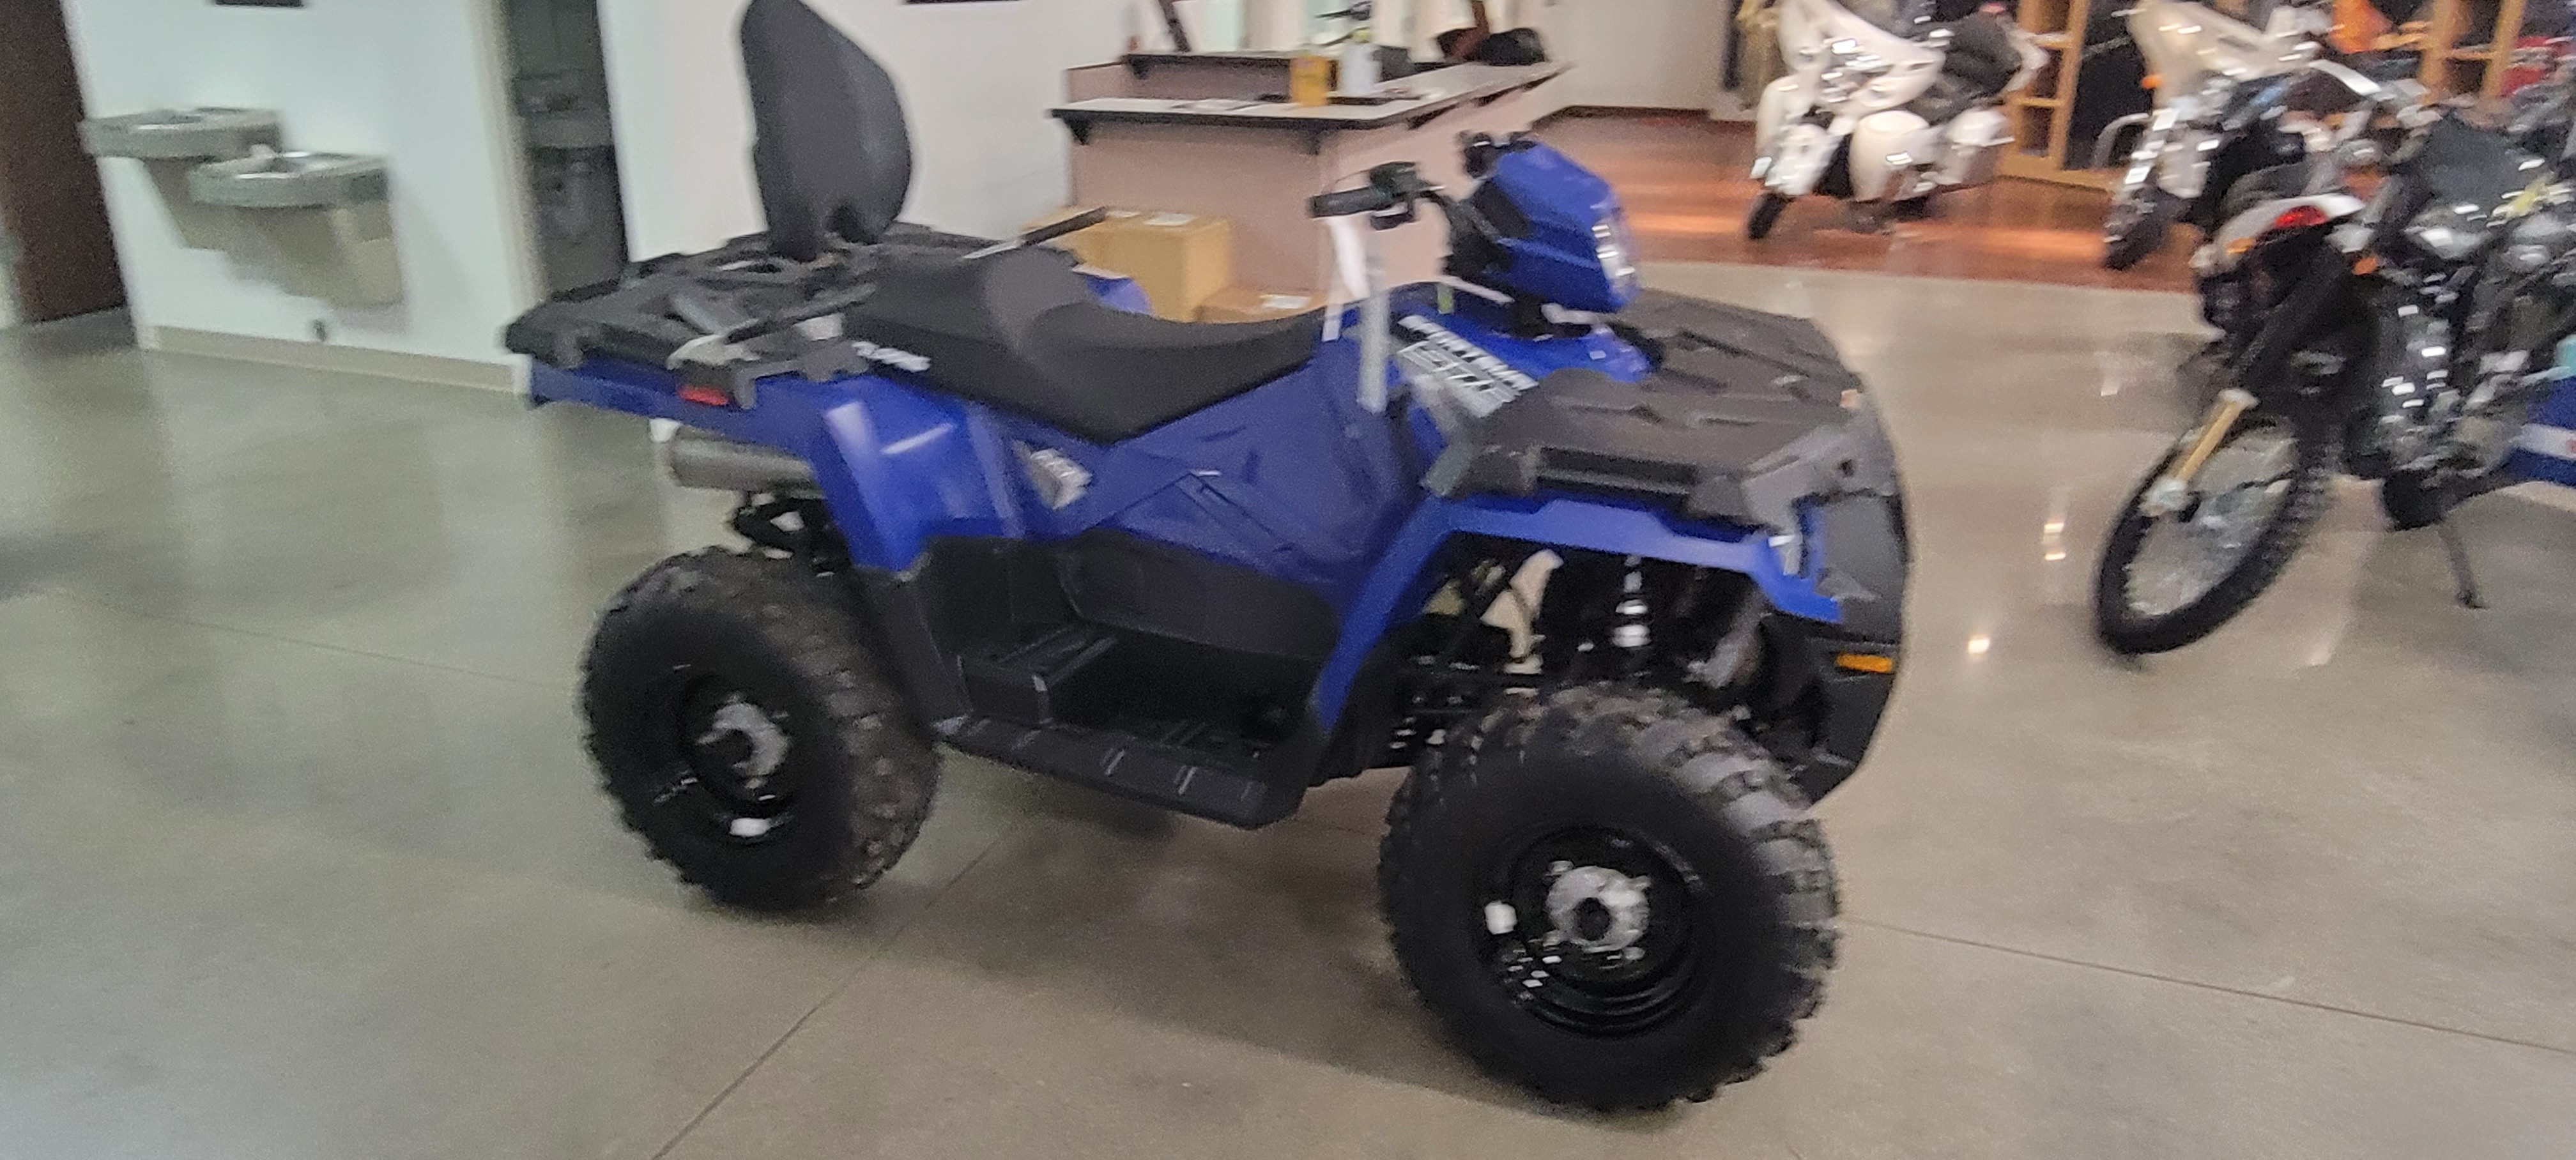 2022 Polaris Sportsman Touring 570 Base at Brenny's Motorcycle Clinic, Bettendorf, IA 52722